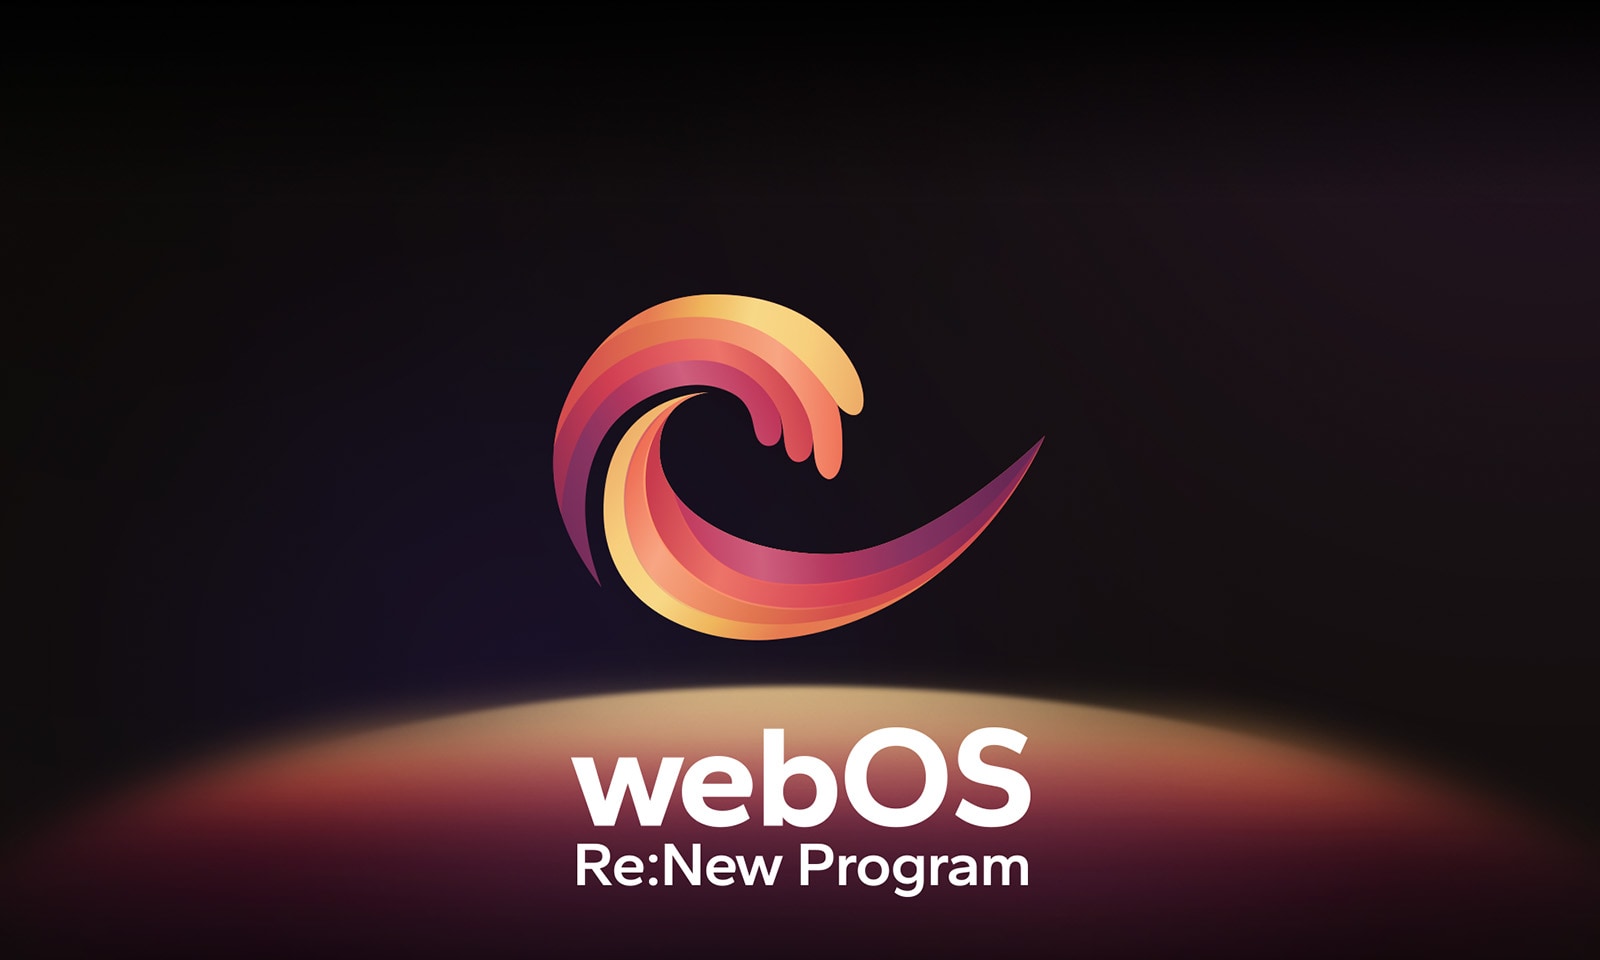 qned-qned80-22-webos-renew-program-d-1